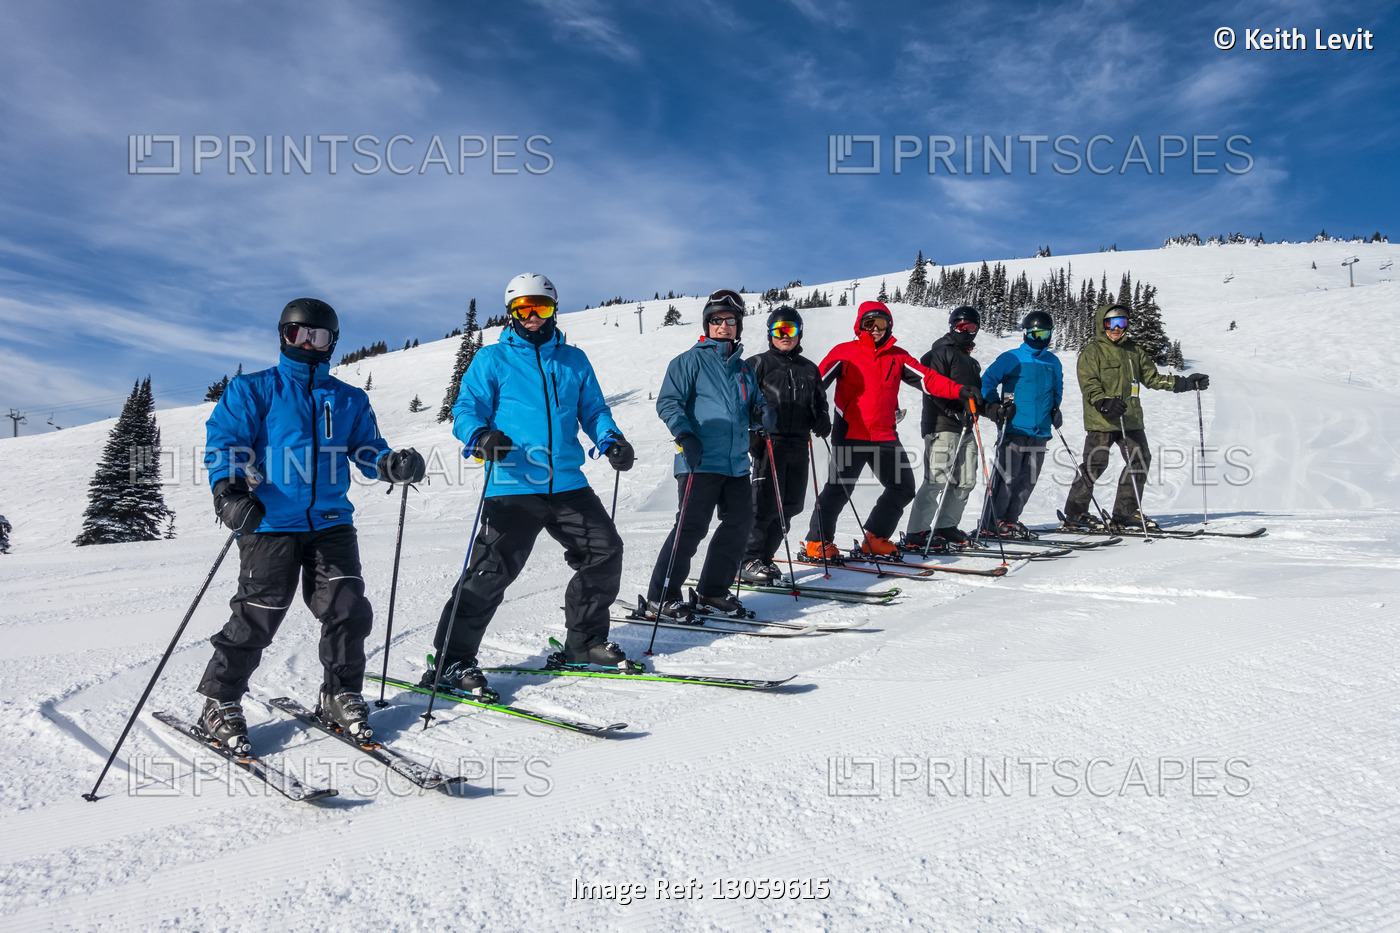 Downhill skiers standing in a row posing for the camera on a snowy slope; ...